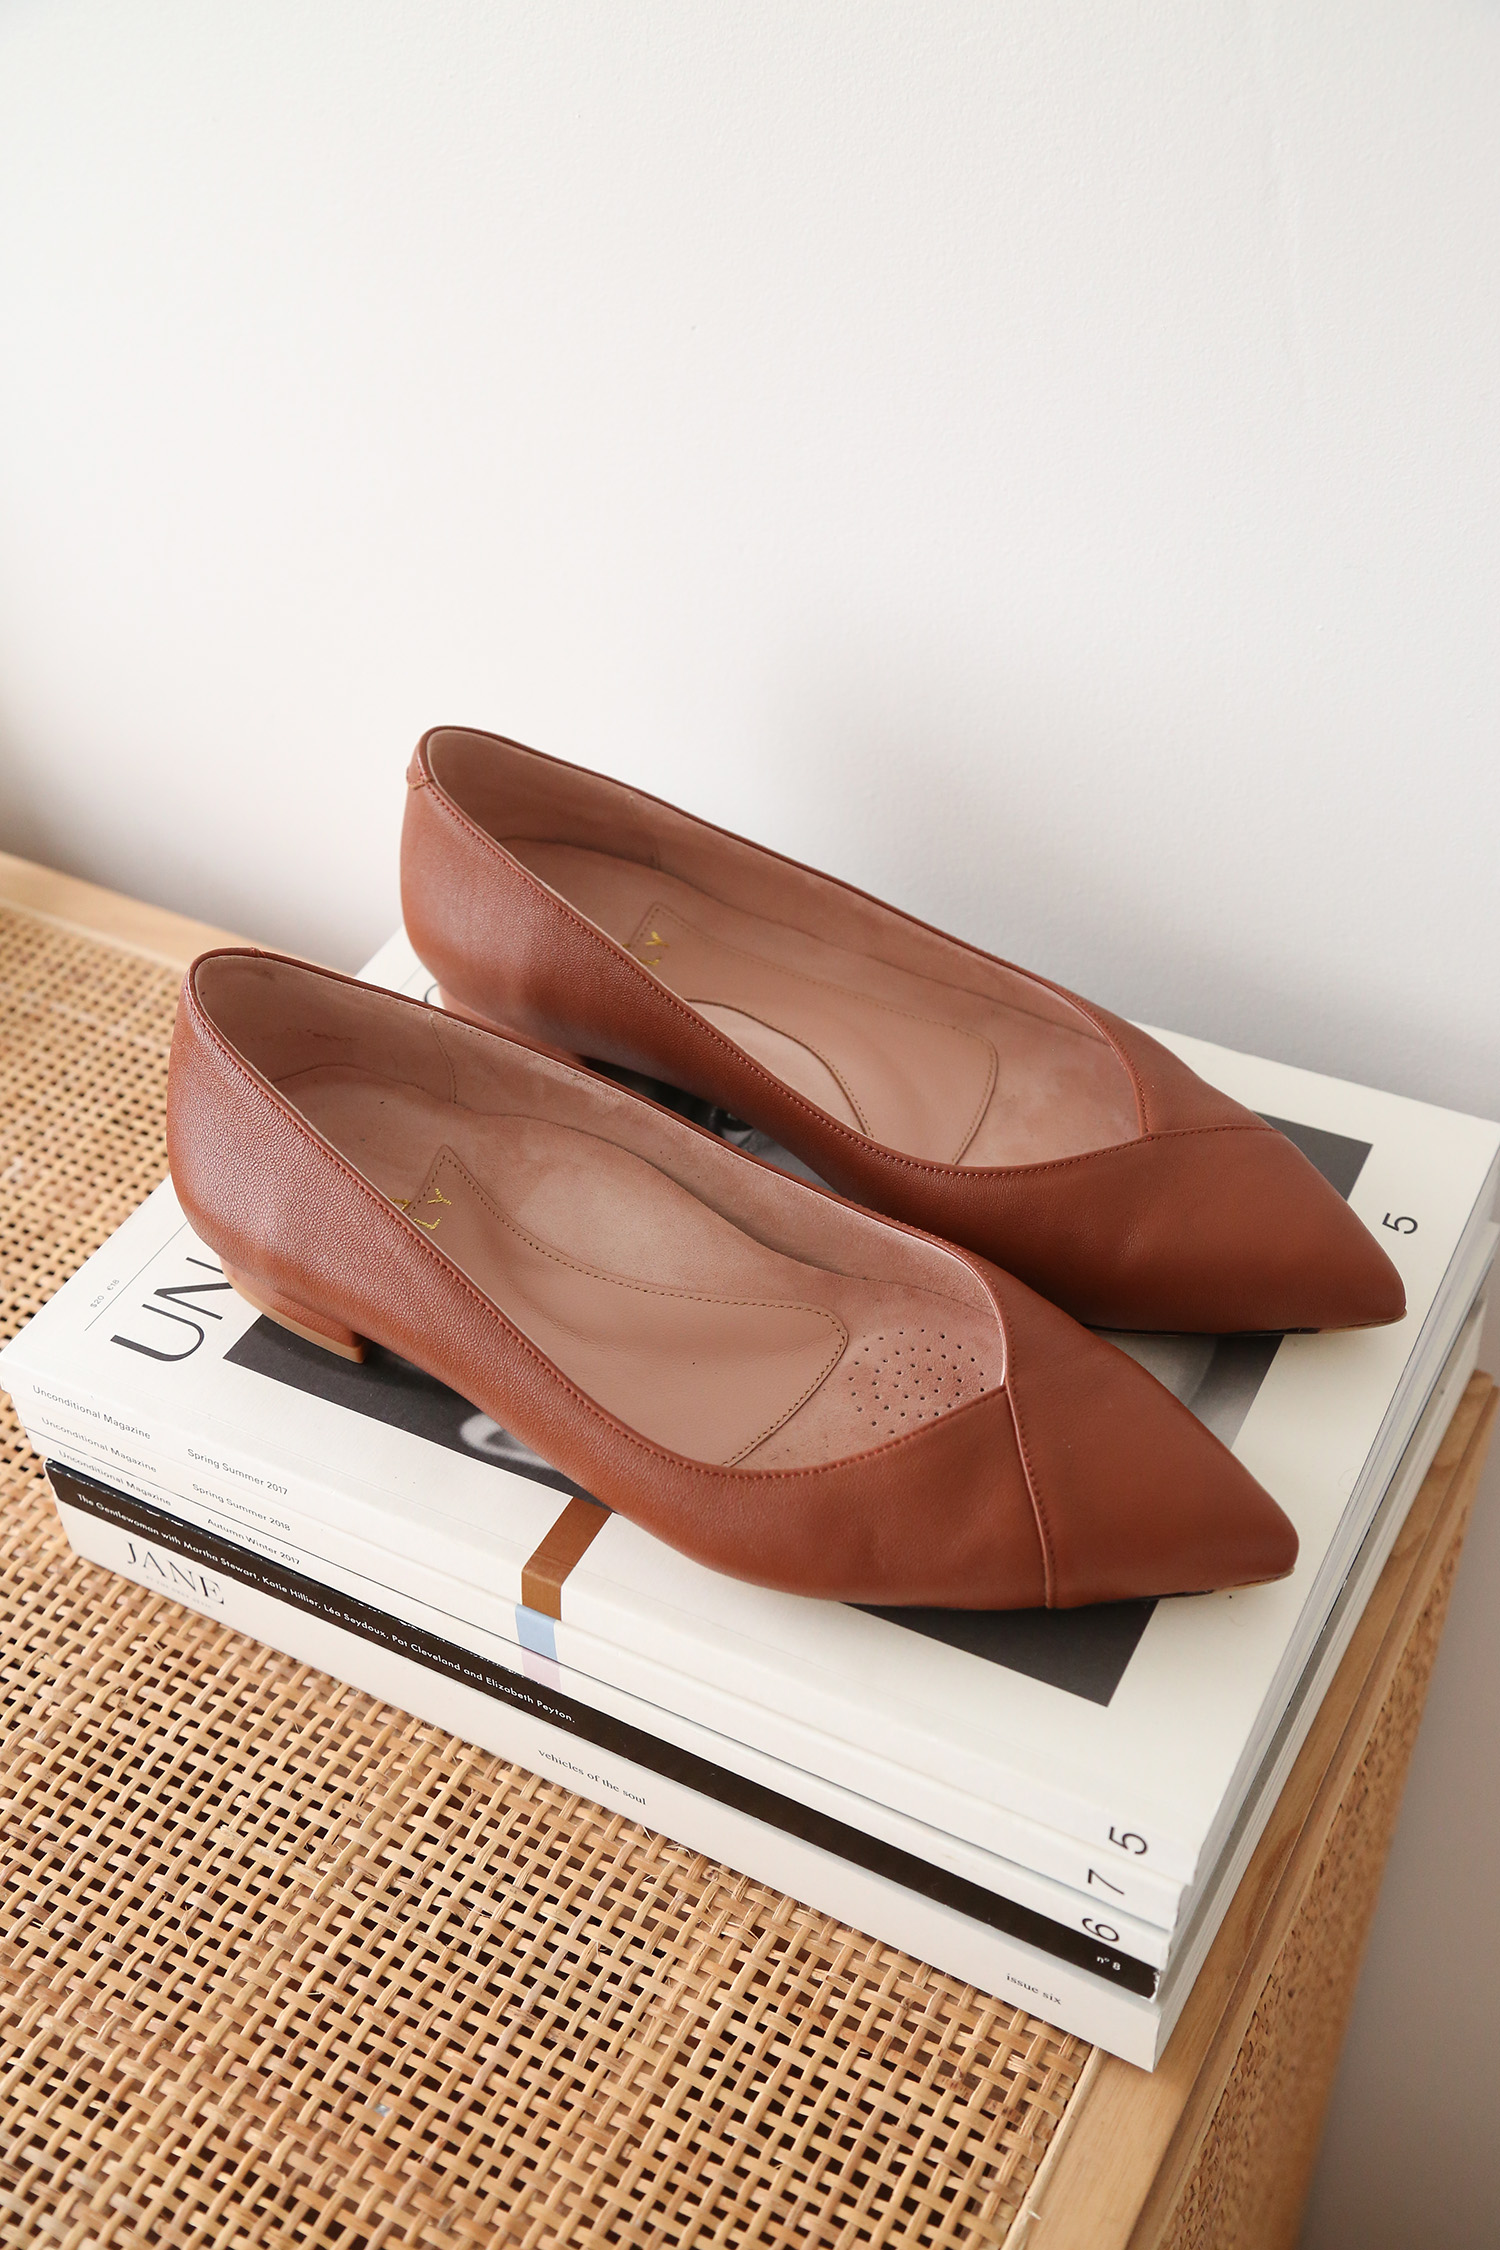 Ally Shoes Leather Flats Review and Discount Code